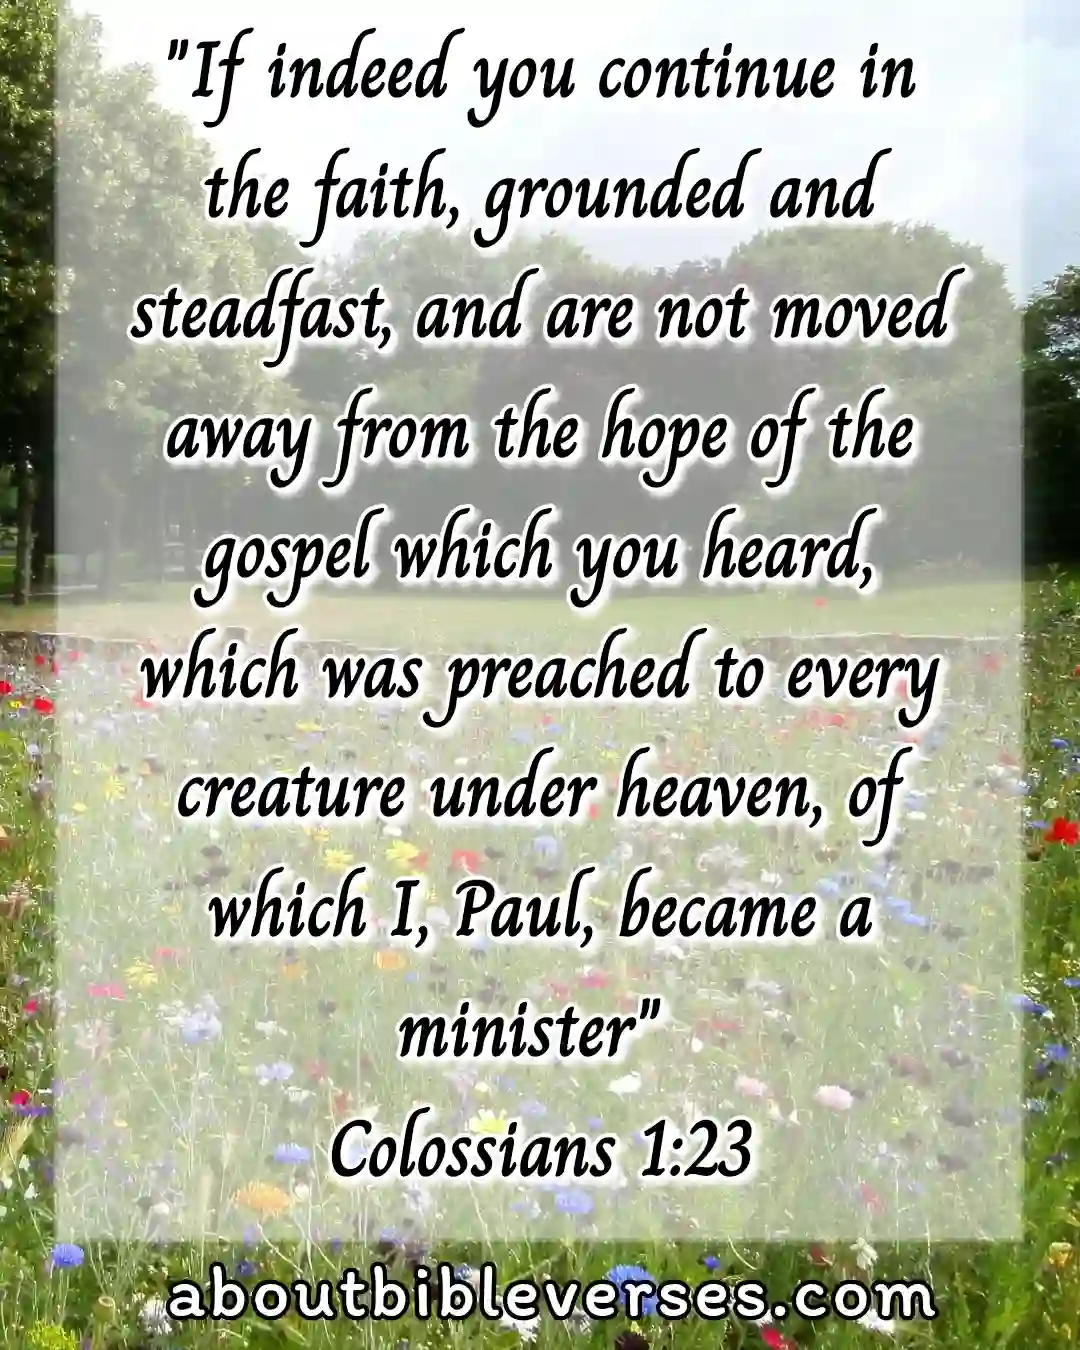 today bible verse (Colossians 1:23)